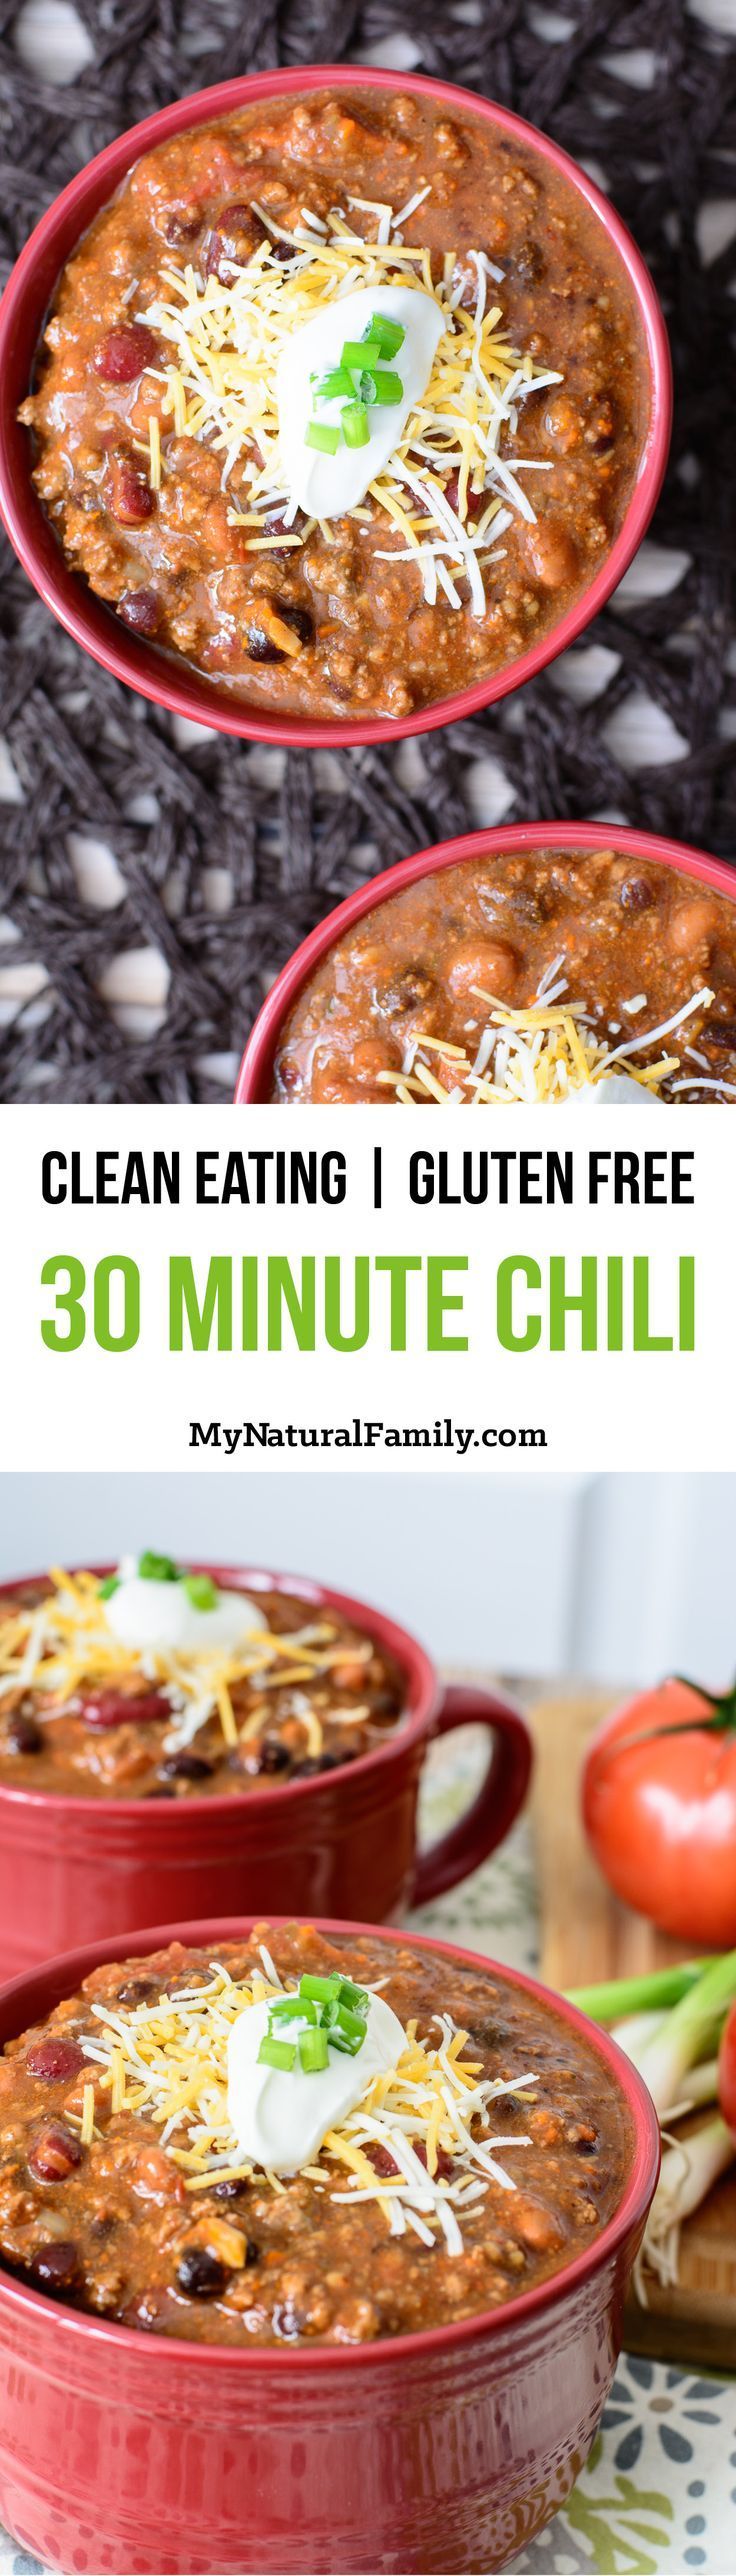 Super-Quick 30 Minute Chili Recipe {Gluten Free, Clean Eating} – I love how easy it is to throw this together. You literally just